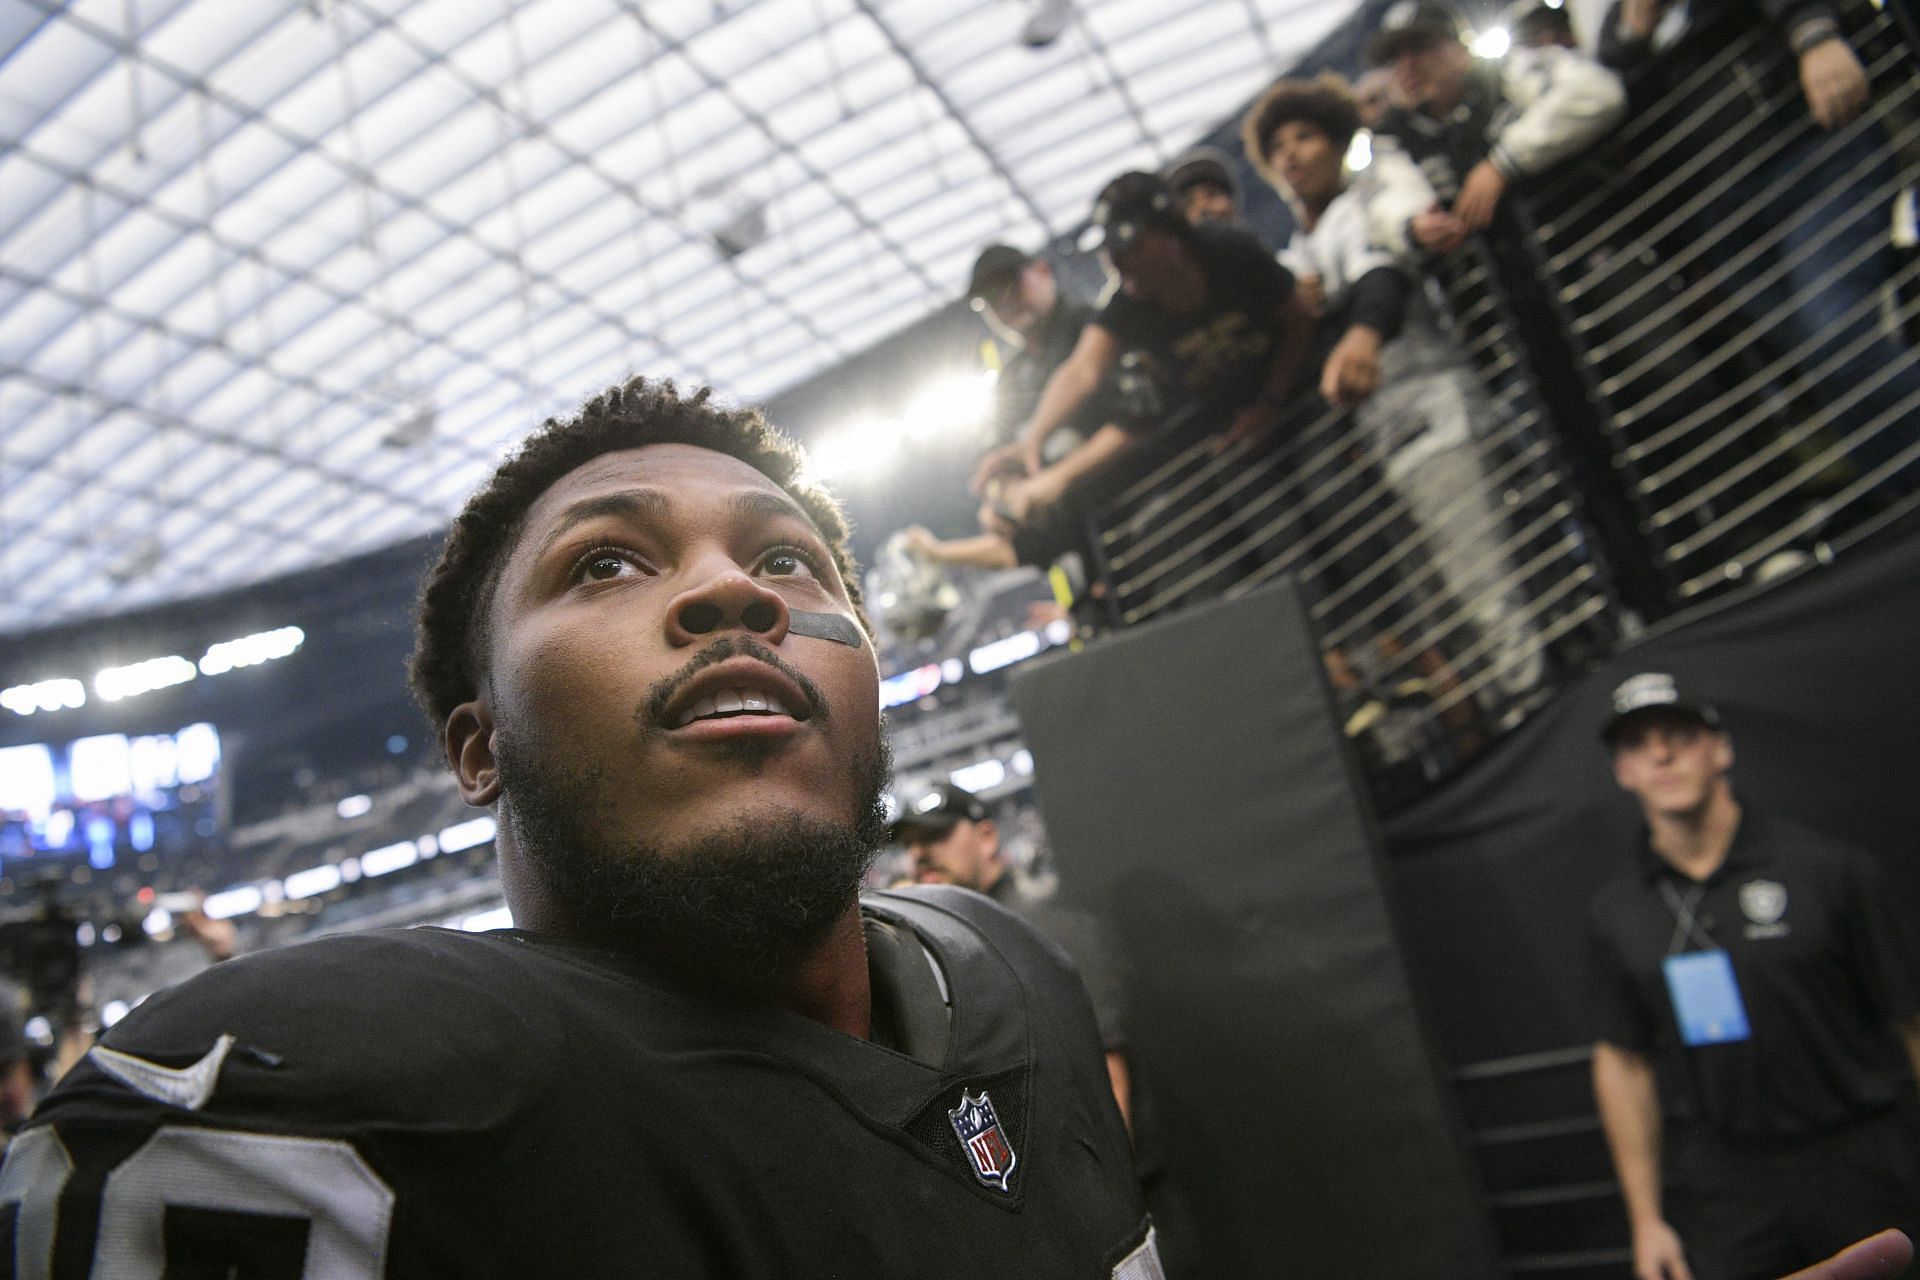 Josh Jacobs And The Las Vegas Raiders: A Mishandling Of The